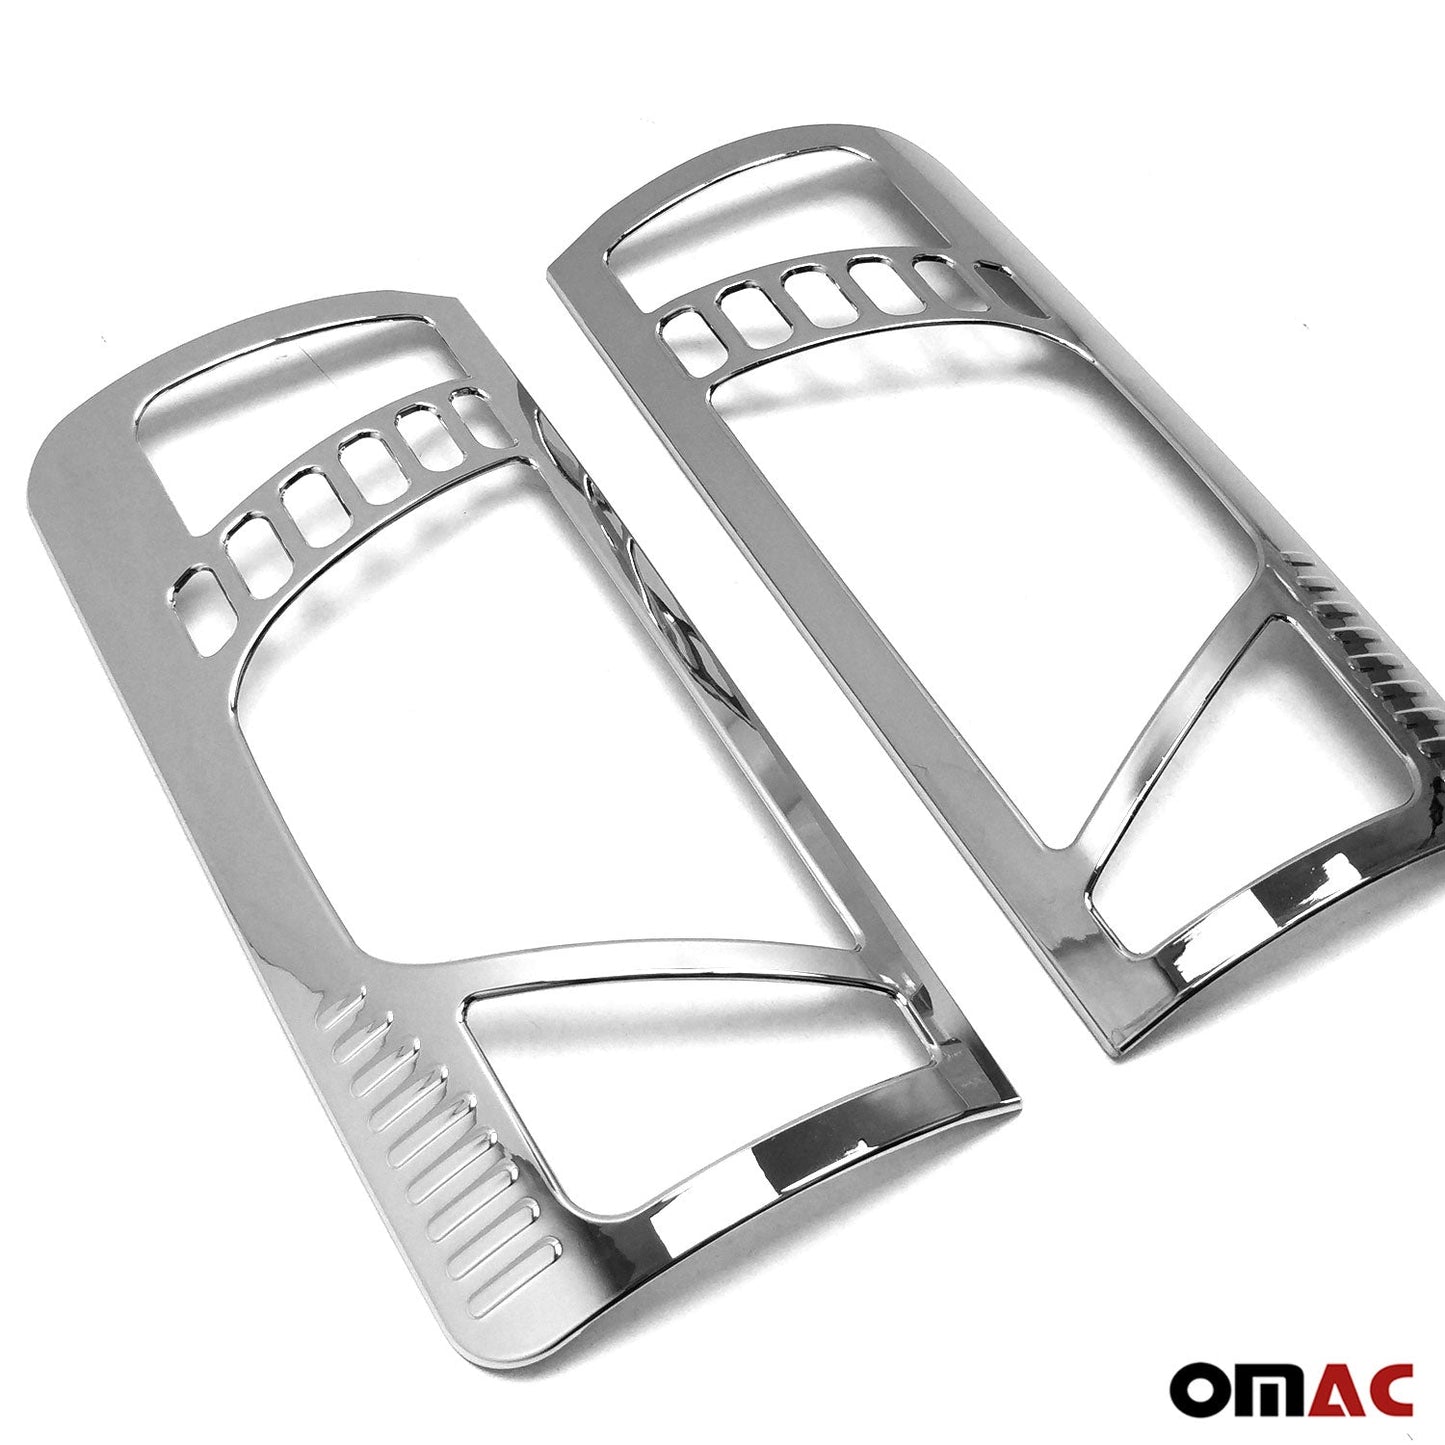 OMAC Trunk Tail Light Trim Frame for Ford Transit Connect 2010-2013 Chrome Silver 2x 2622101